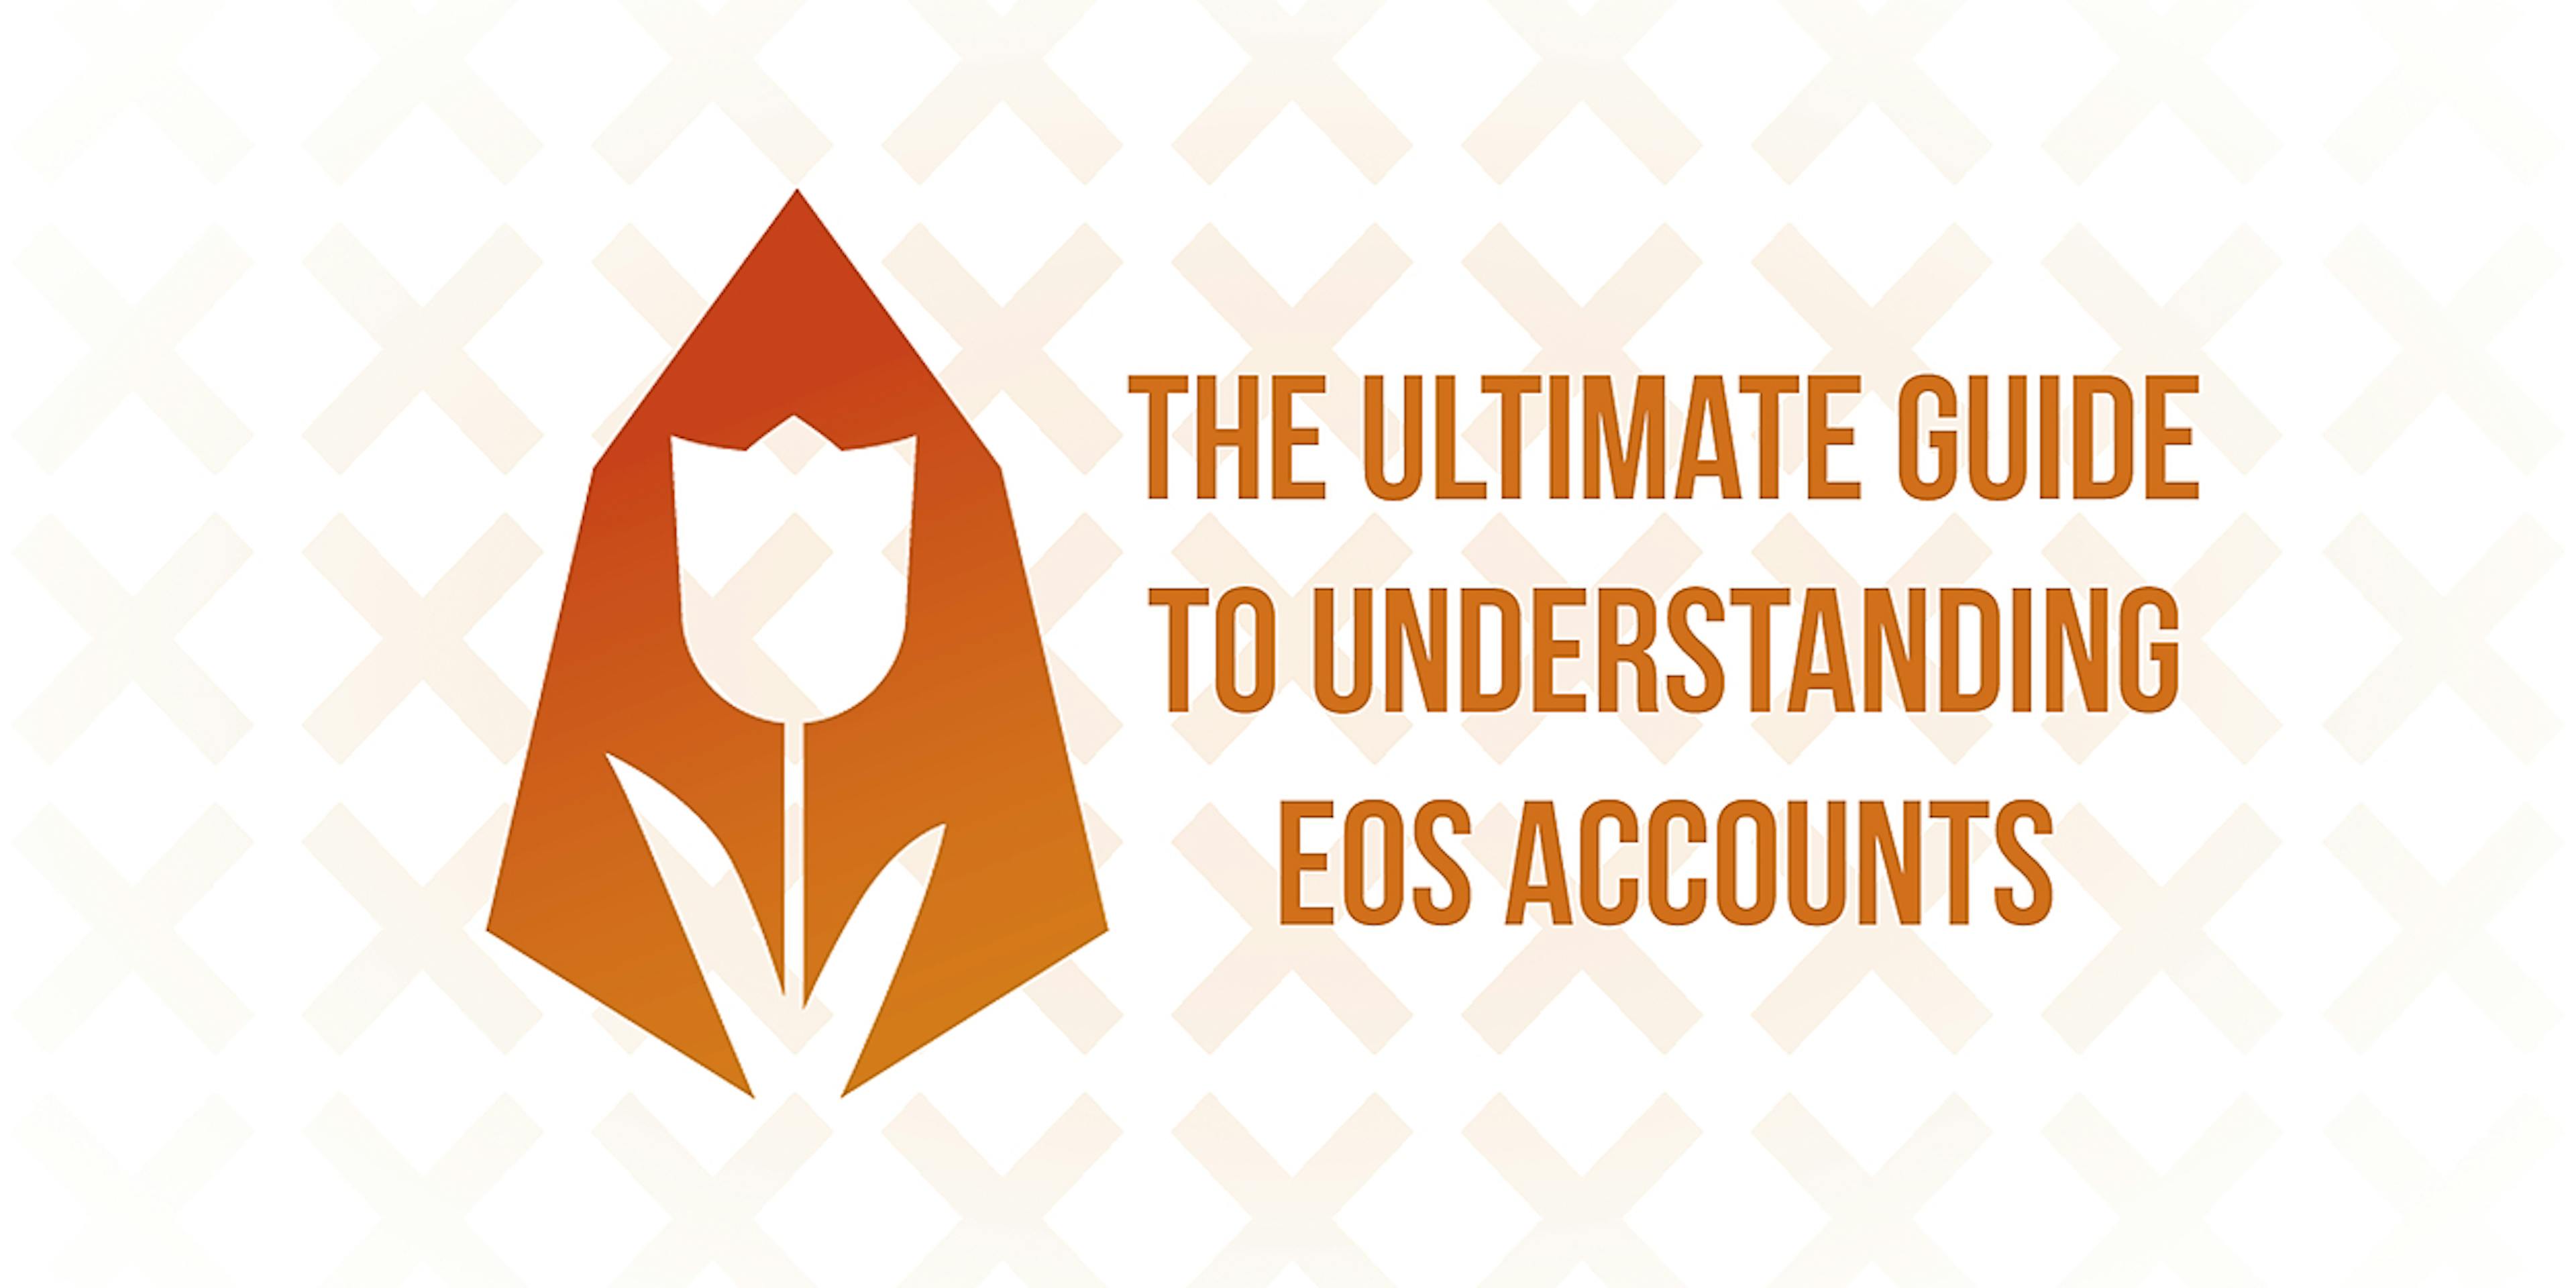 featured image - The Ultimate Guide To Understanding EOS Accounts